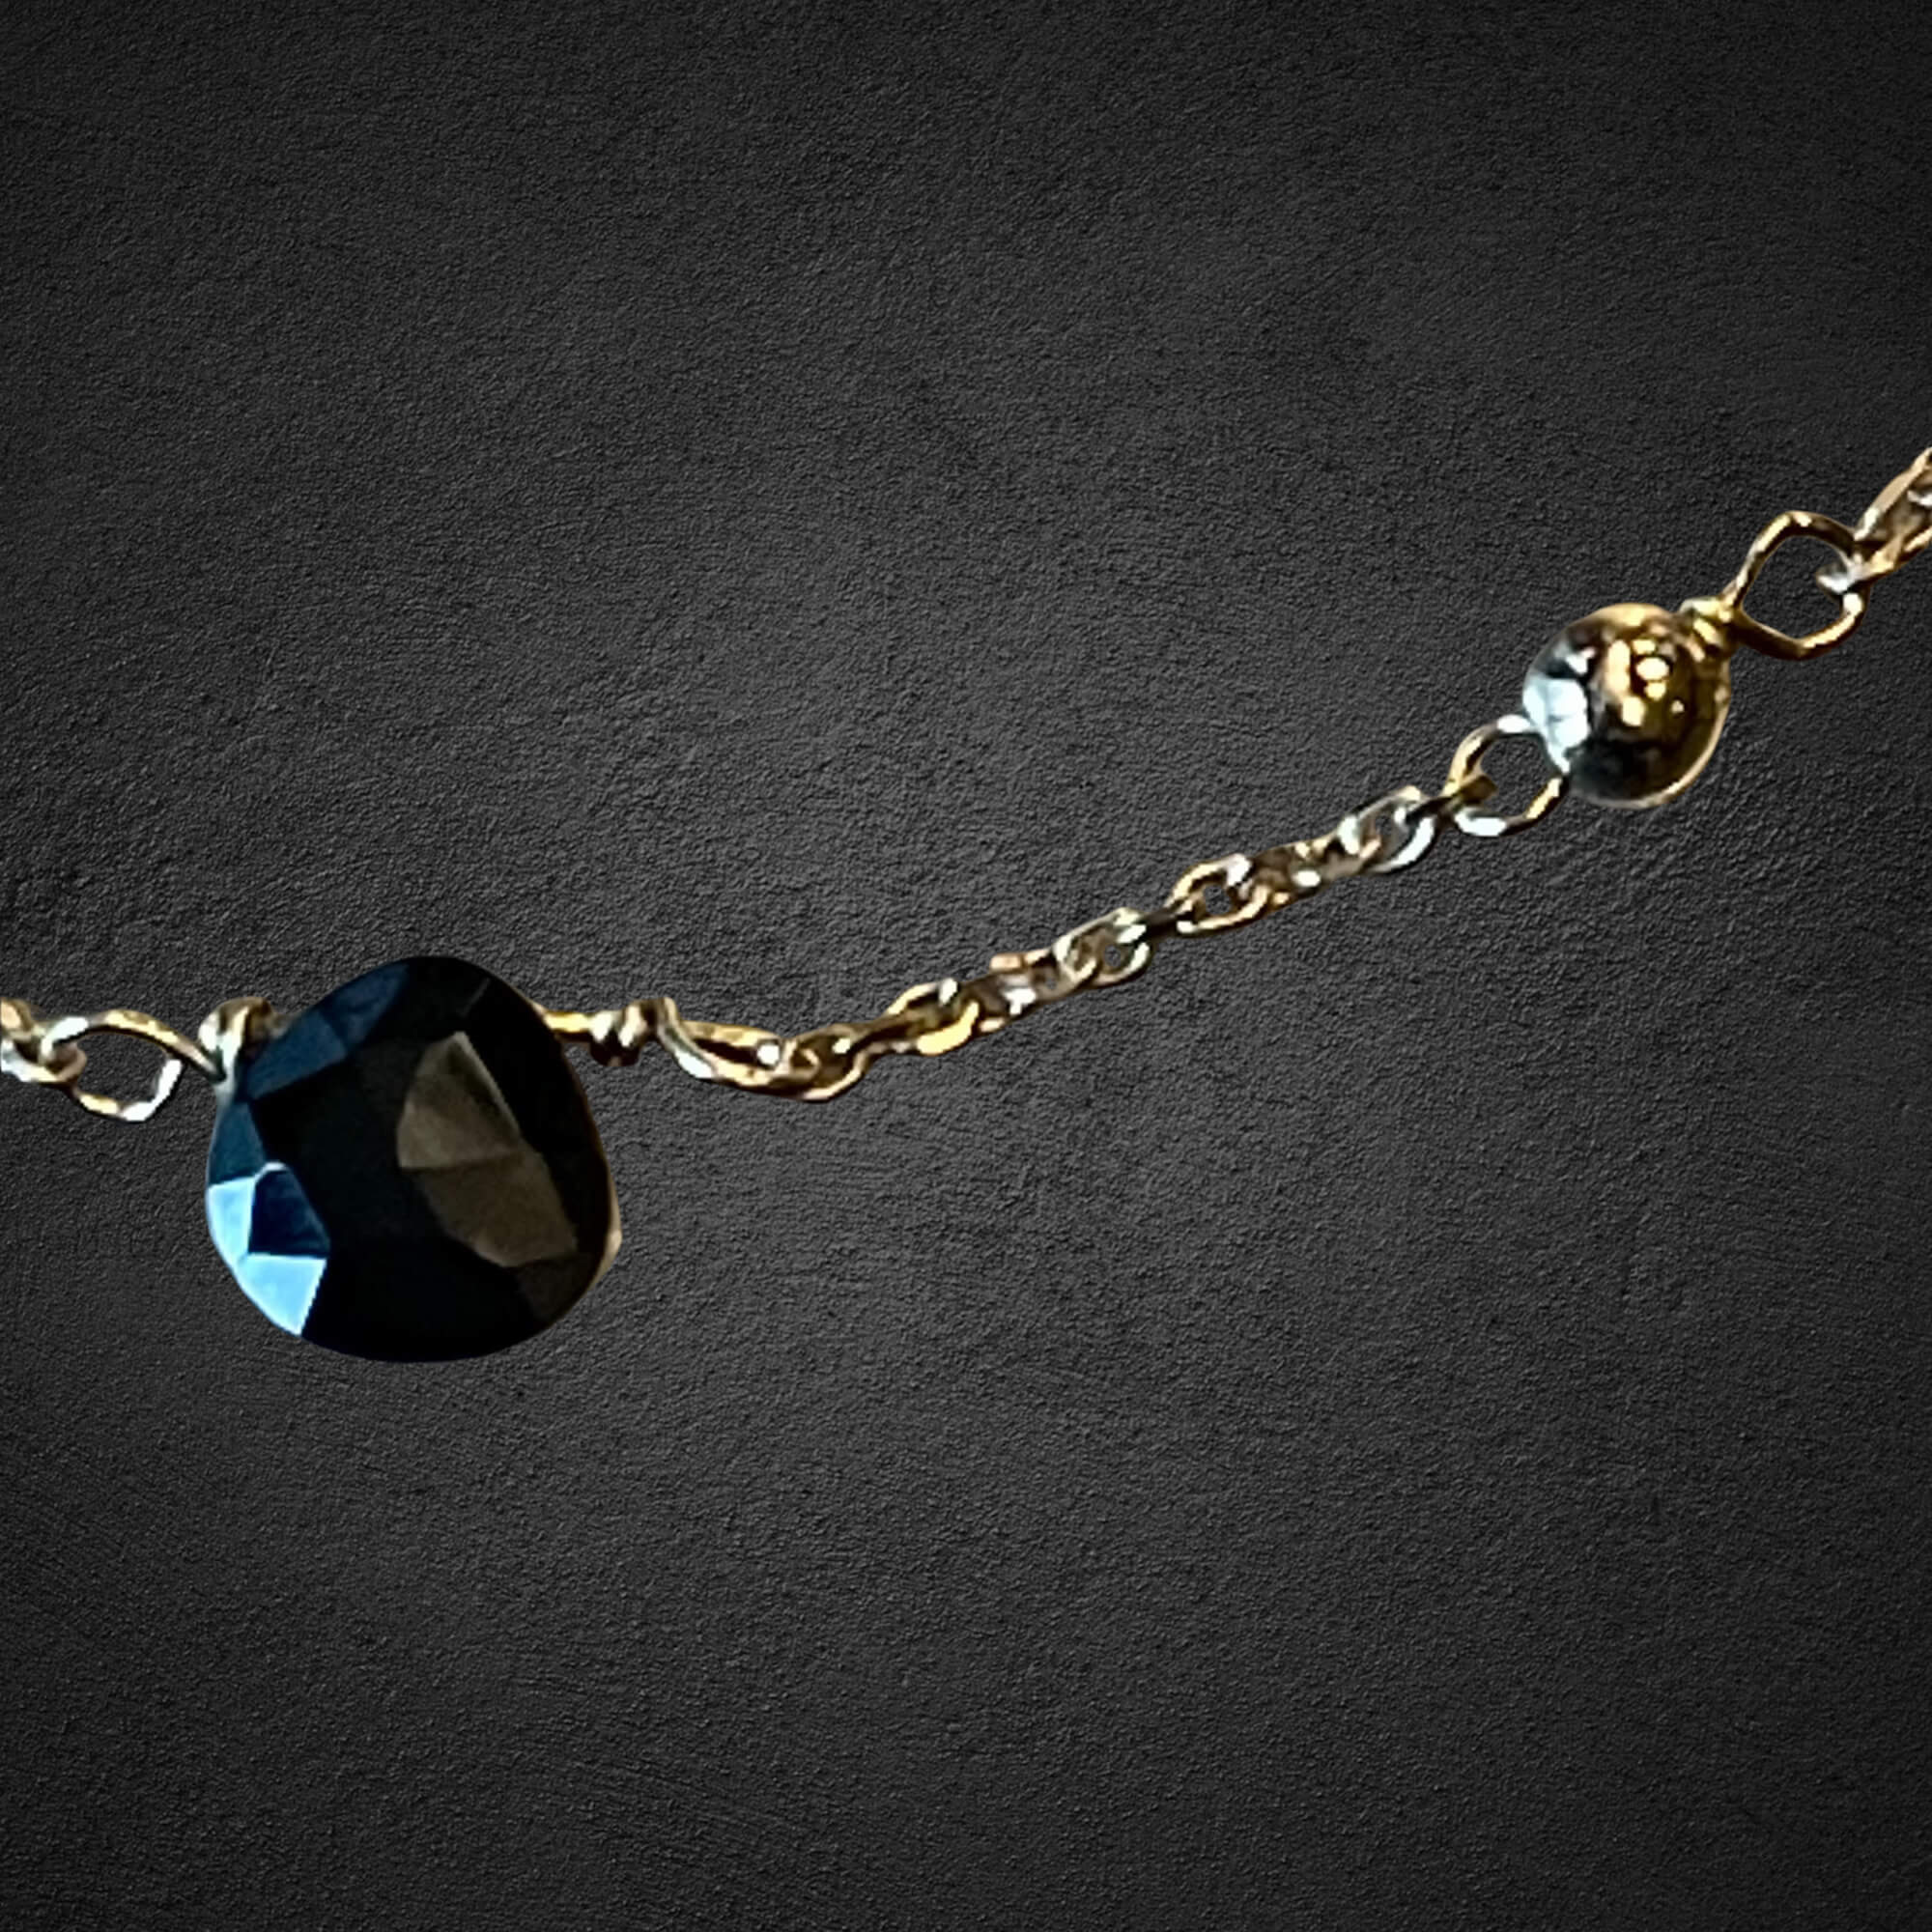 Gold-plated necklace with onyx stones